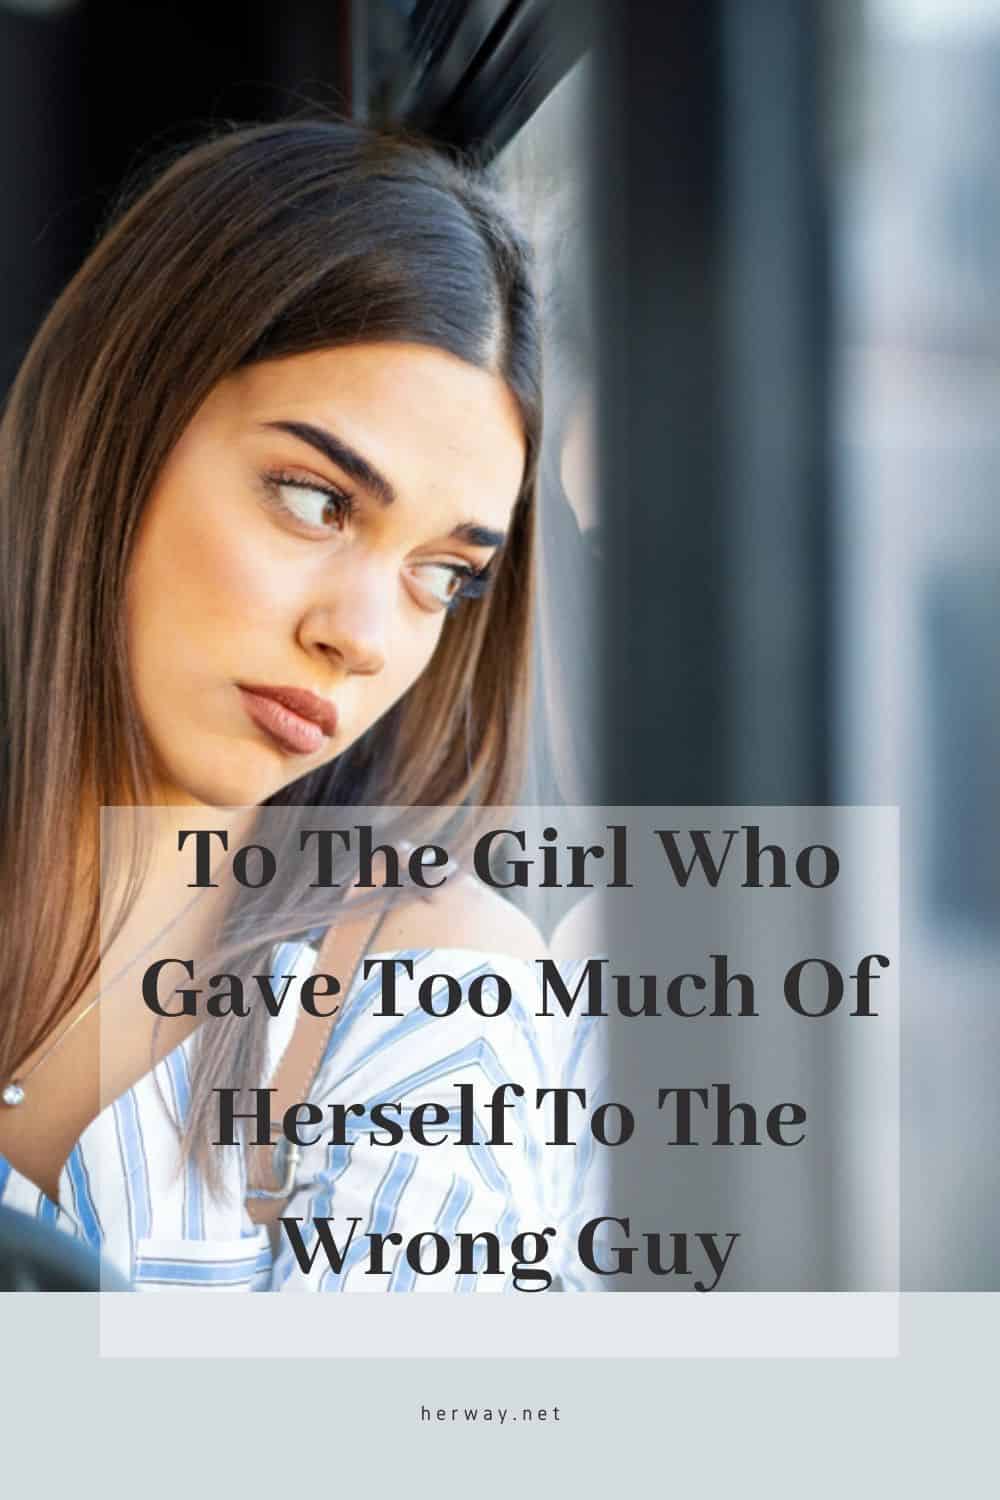 To The Girl Who Gave Too Much Of Herself To The Wrong Guy